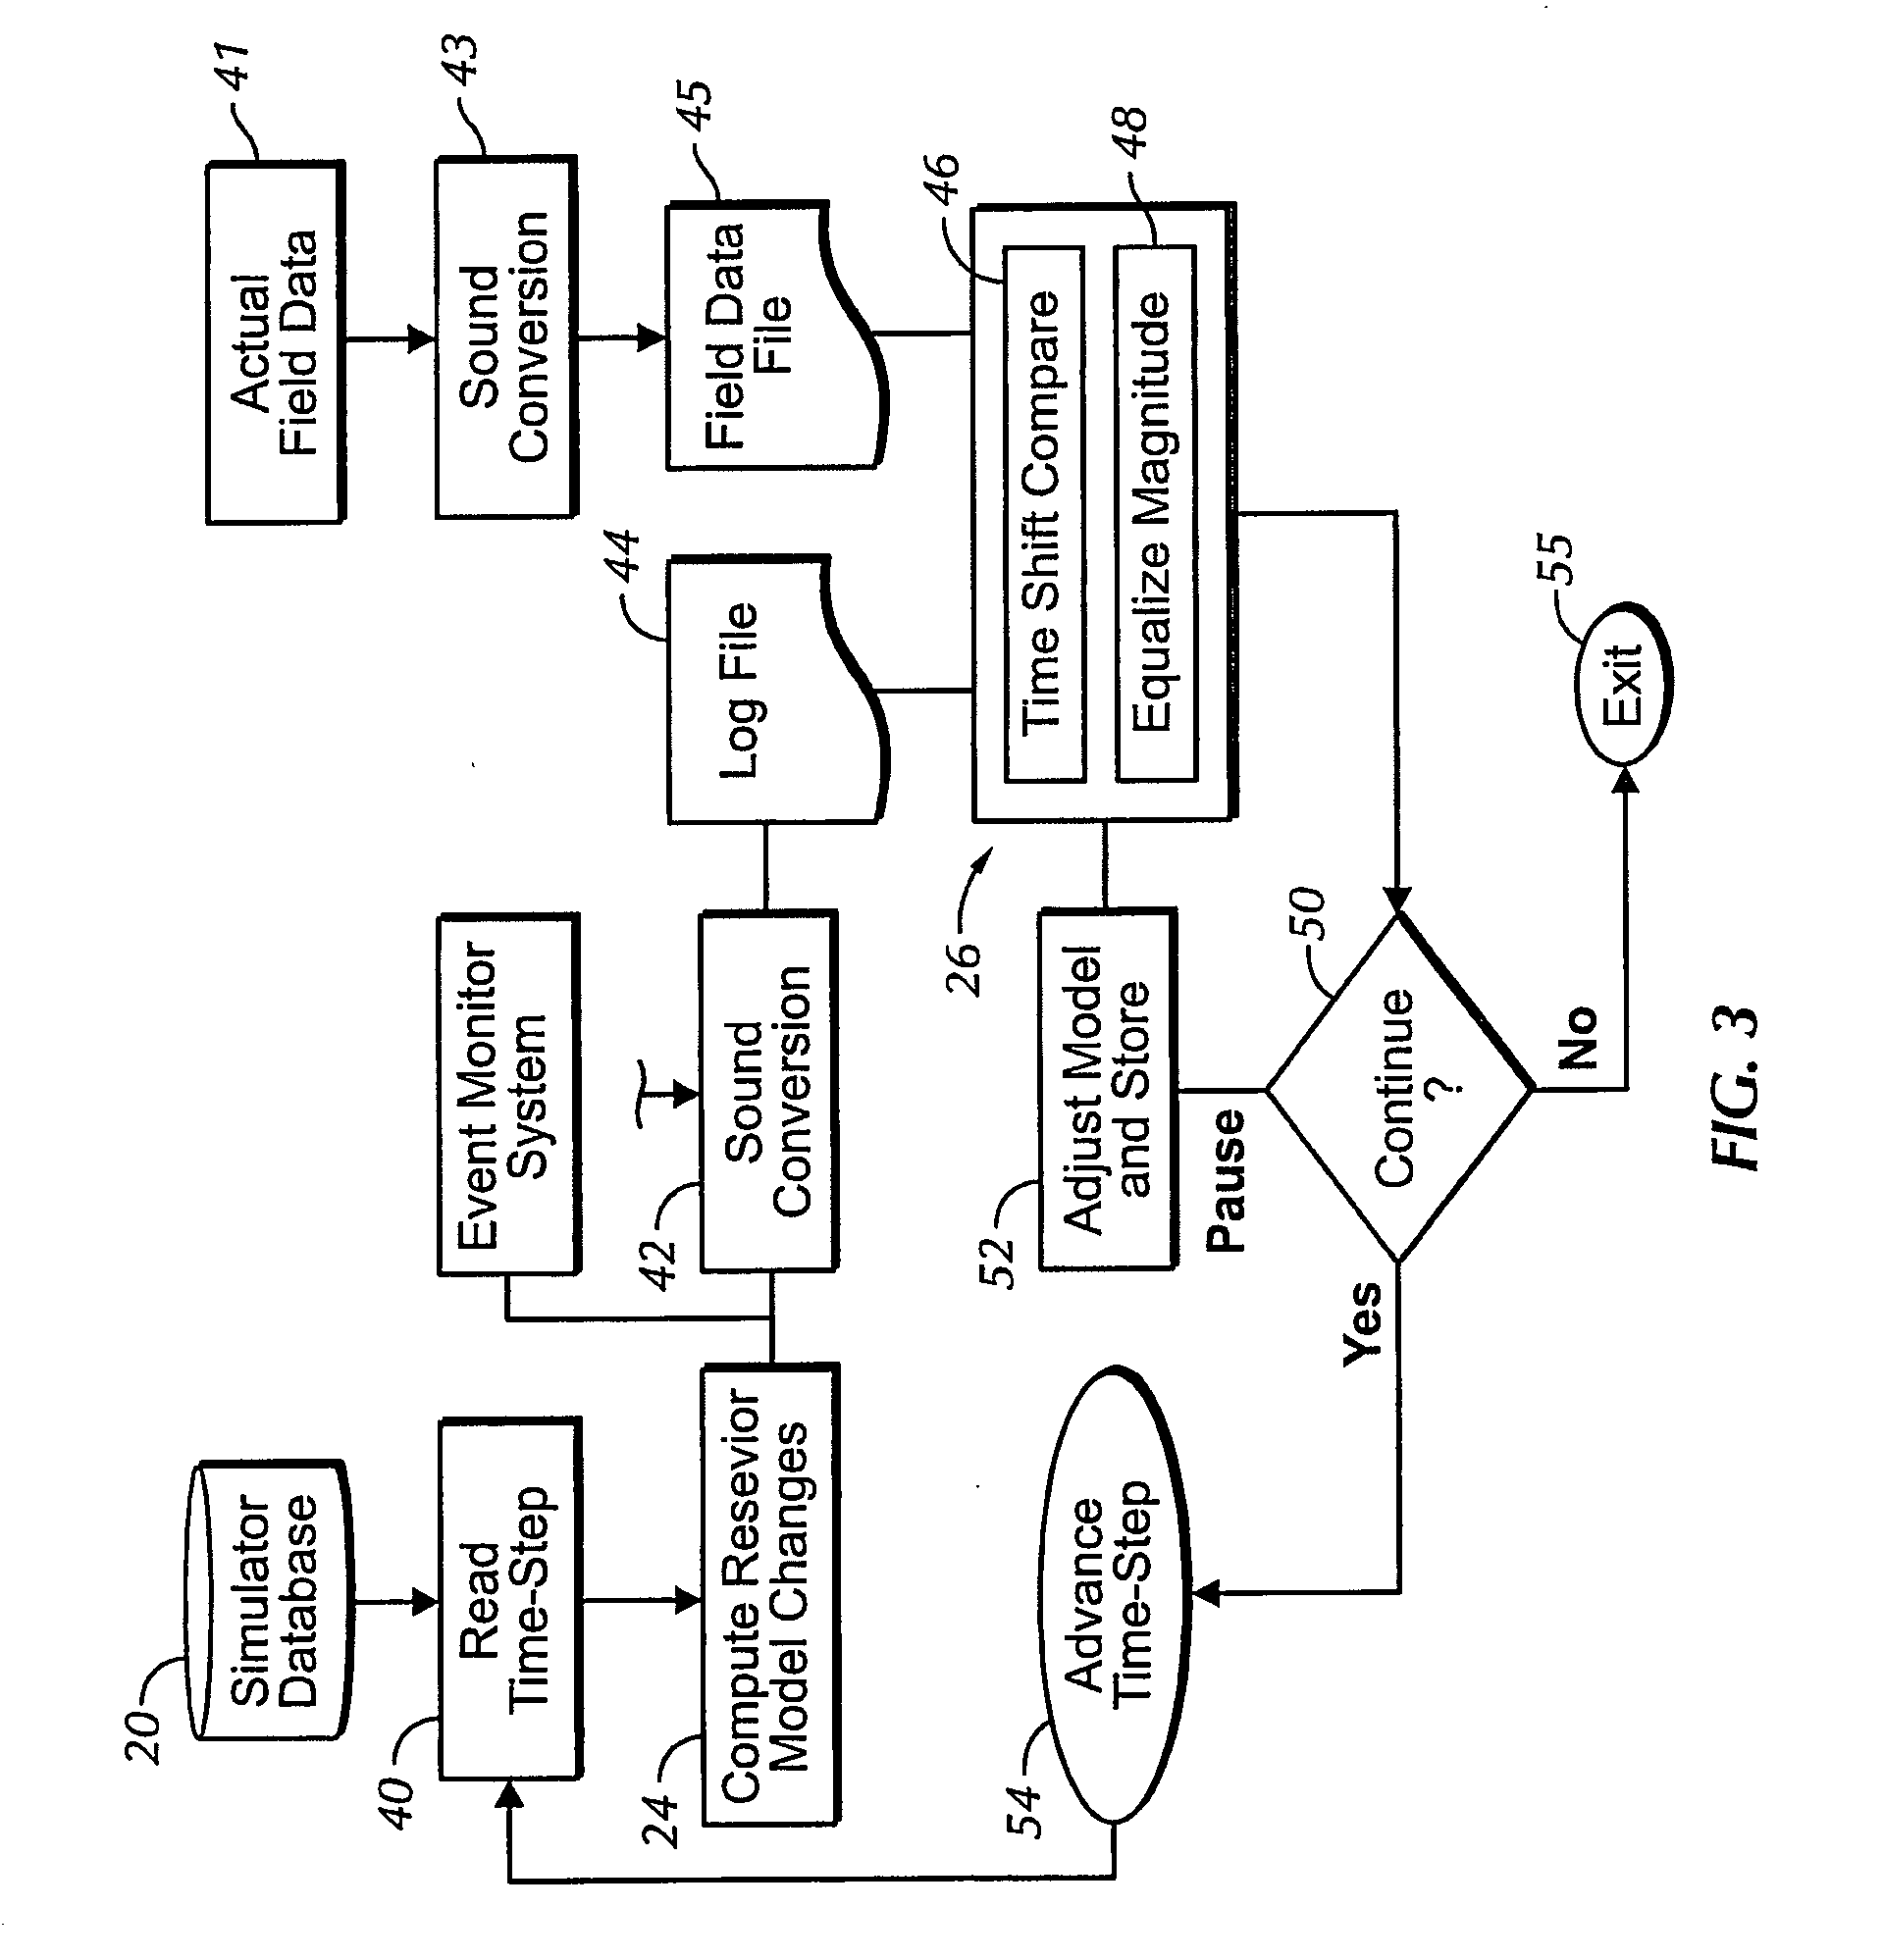 Sound enabling computerized system for real time reservoir model calibration using field surveillance data